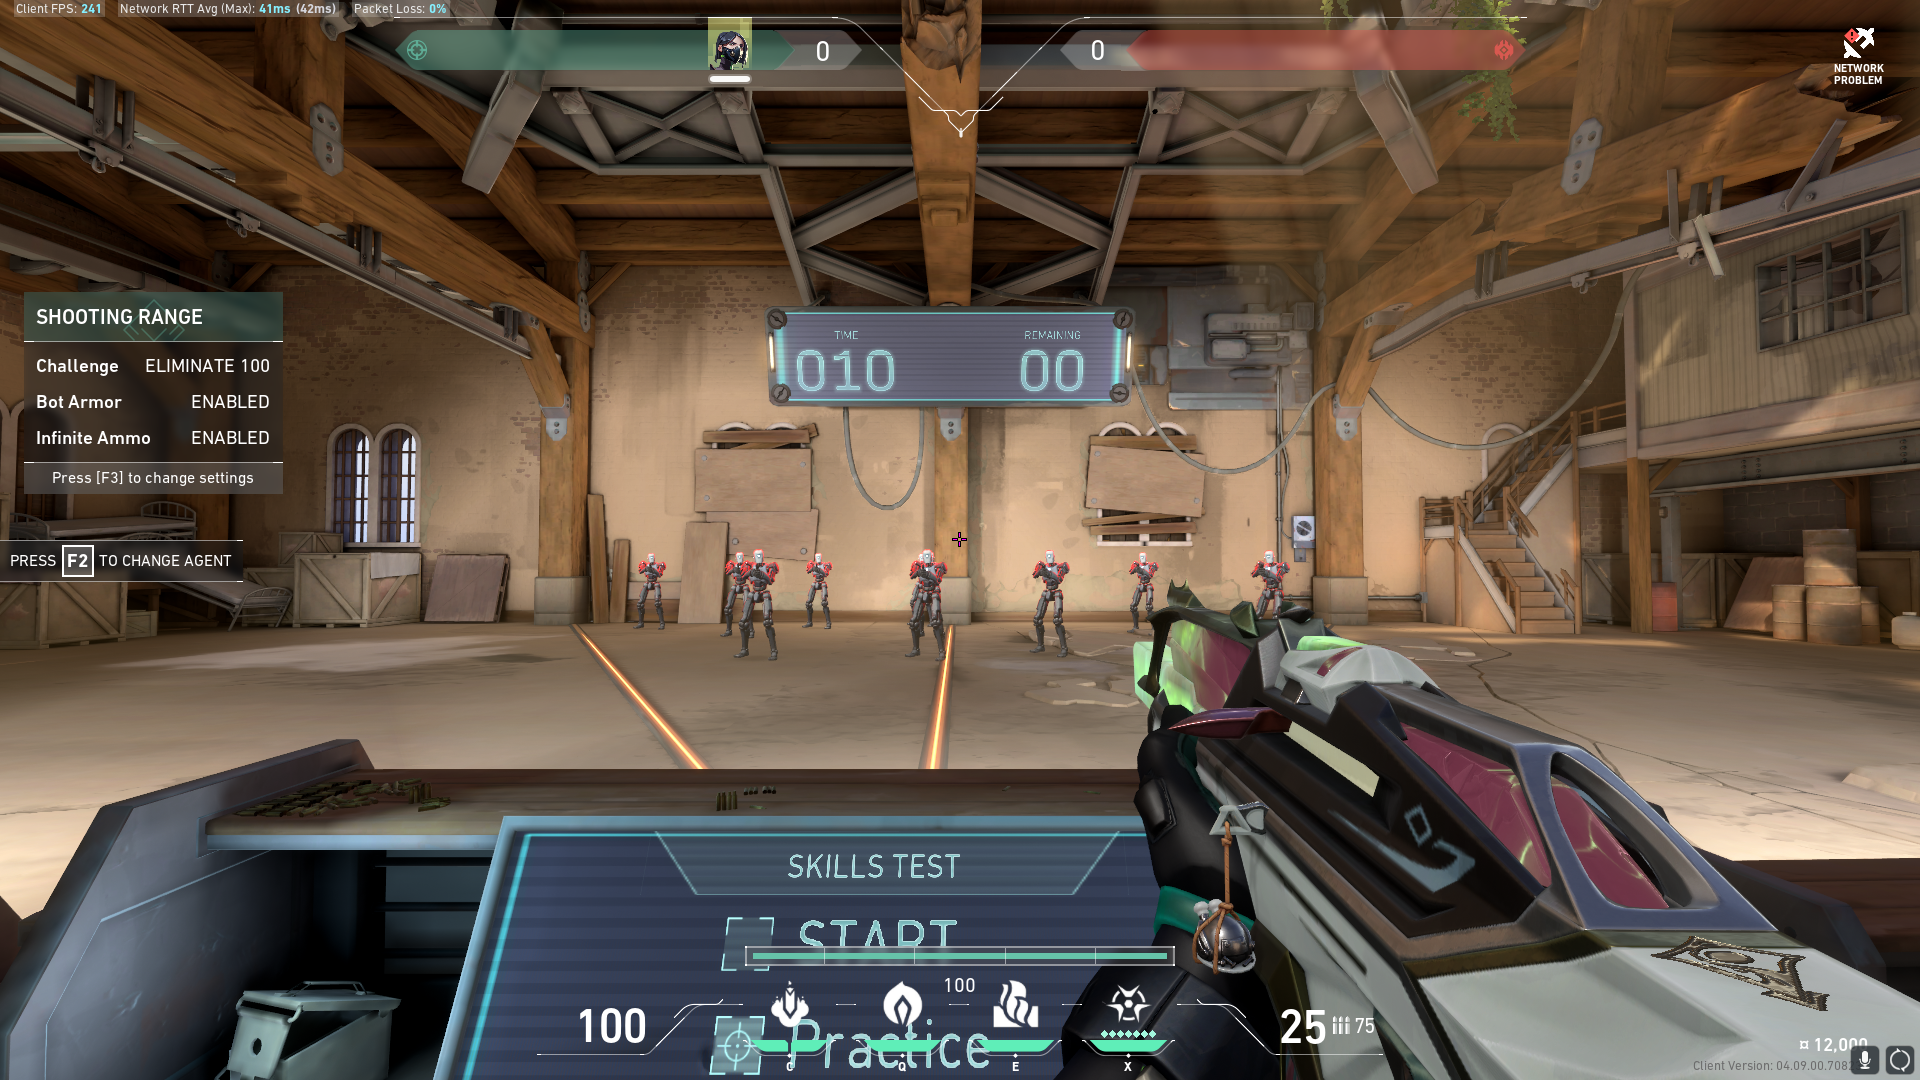 Reticule valorant: The best reticles and the codes to get them